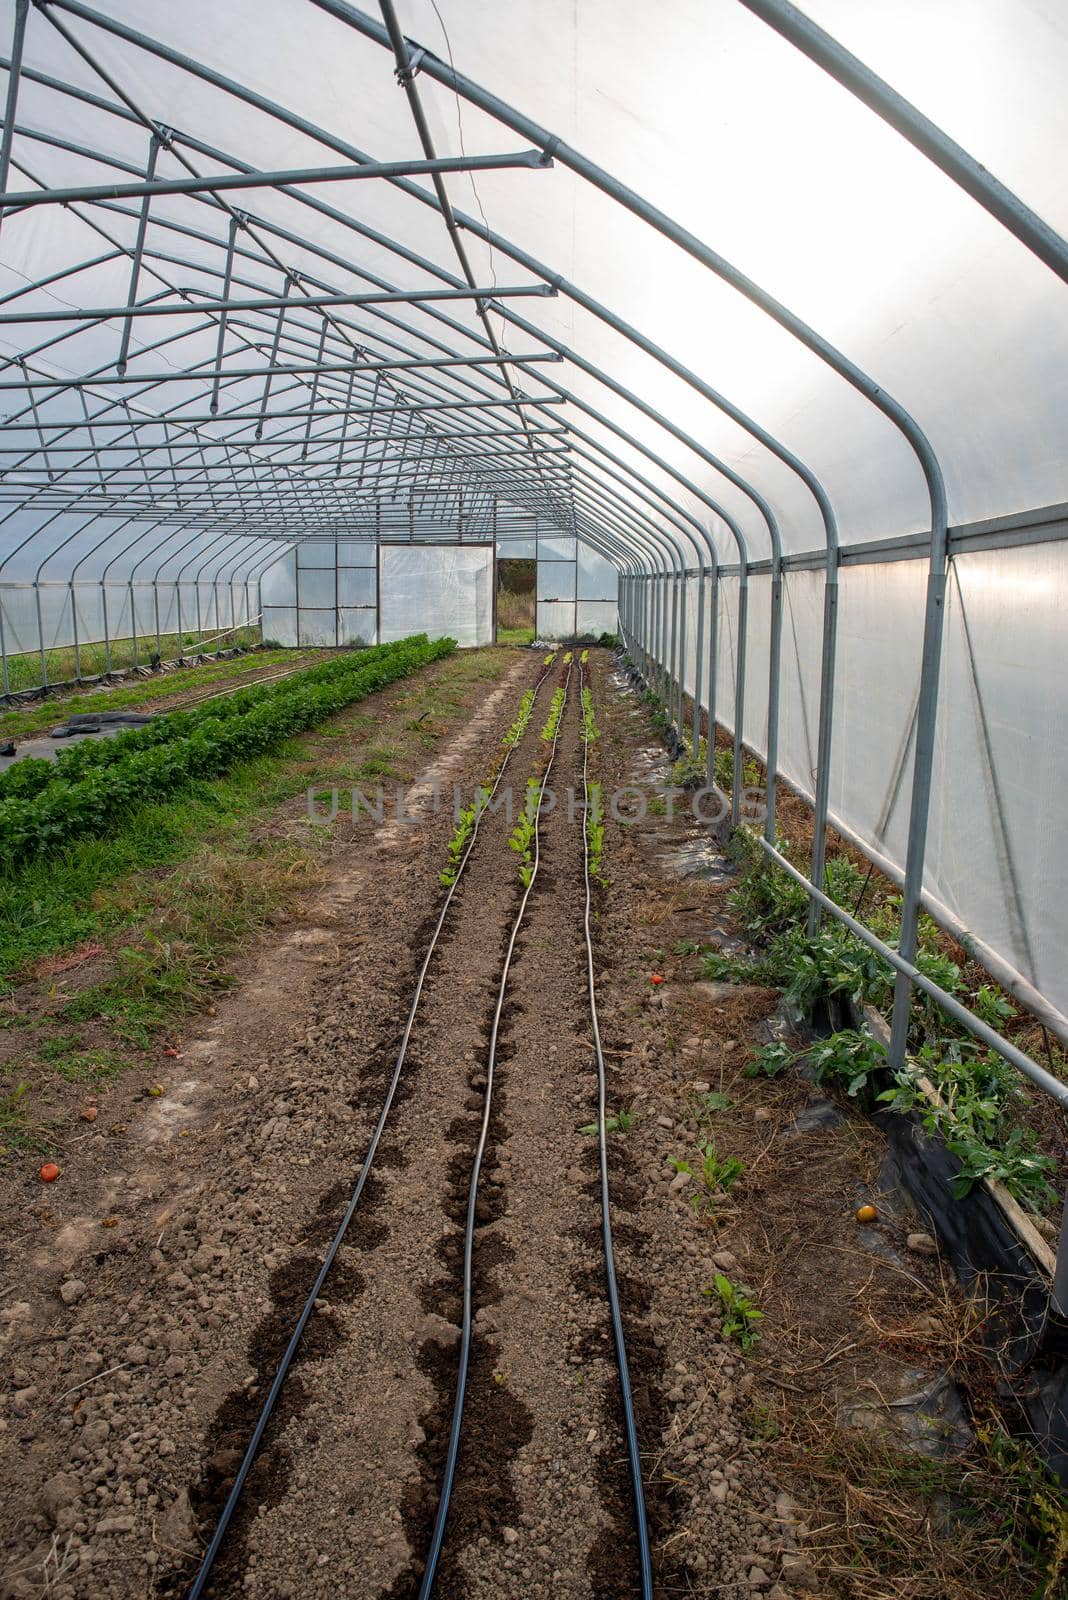 Irrigation lines and rows of vegetables in greenhouse with open door by marysalen